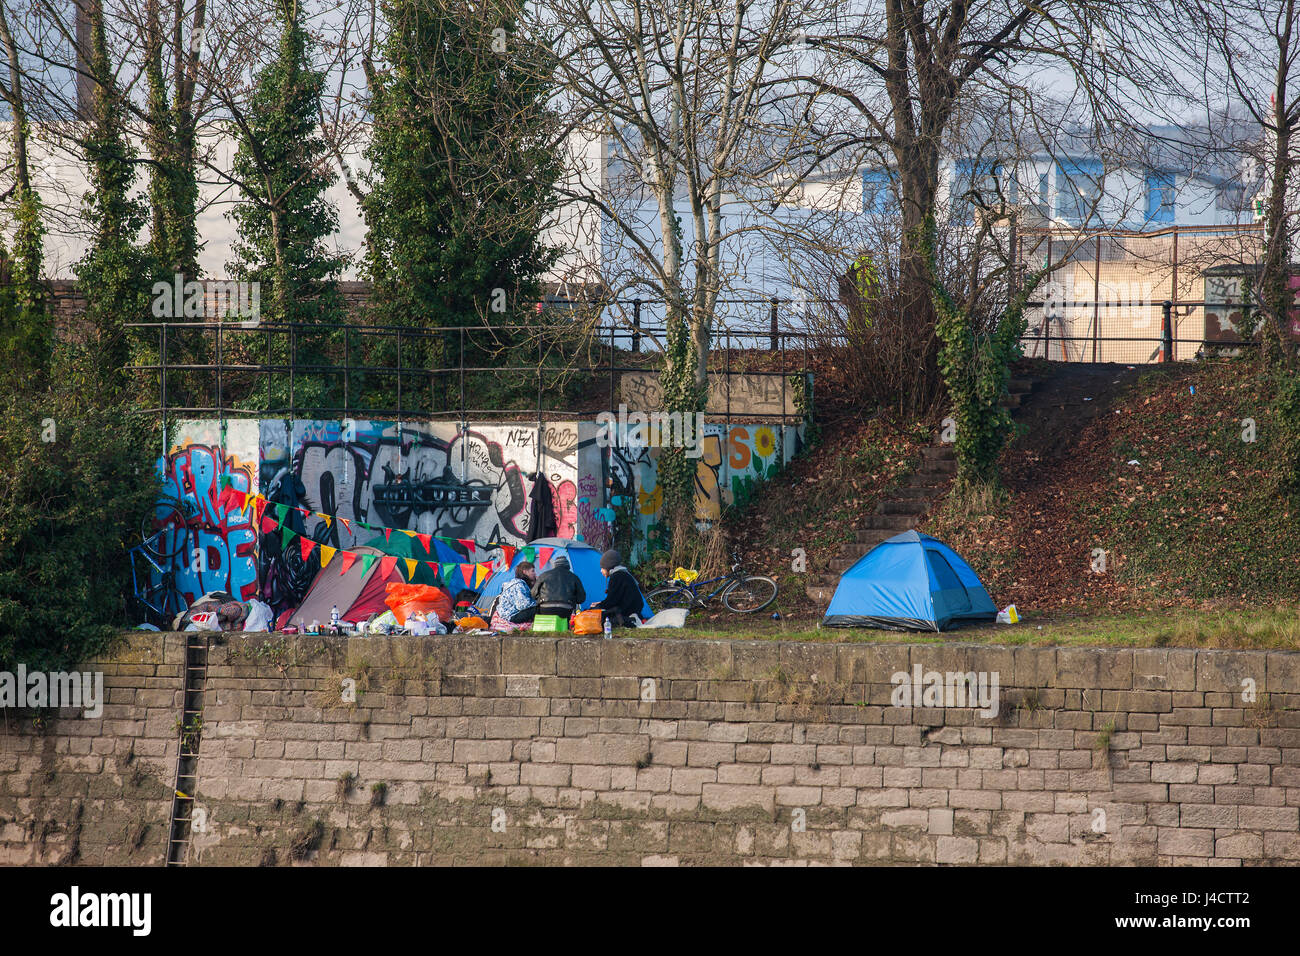 Rough sleepers in a small tented camp on the banks of the River Avon, Bristol. Stock Photo